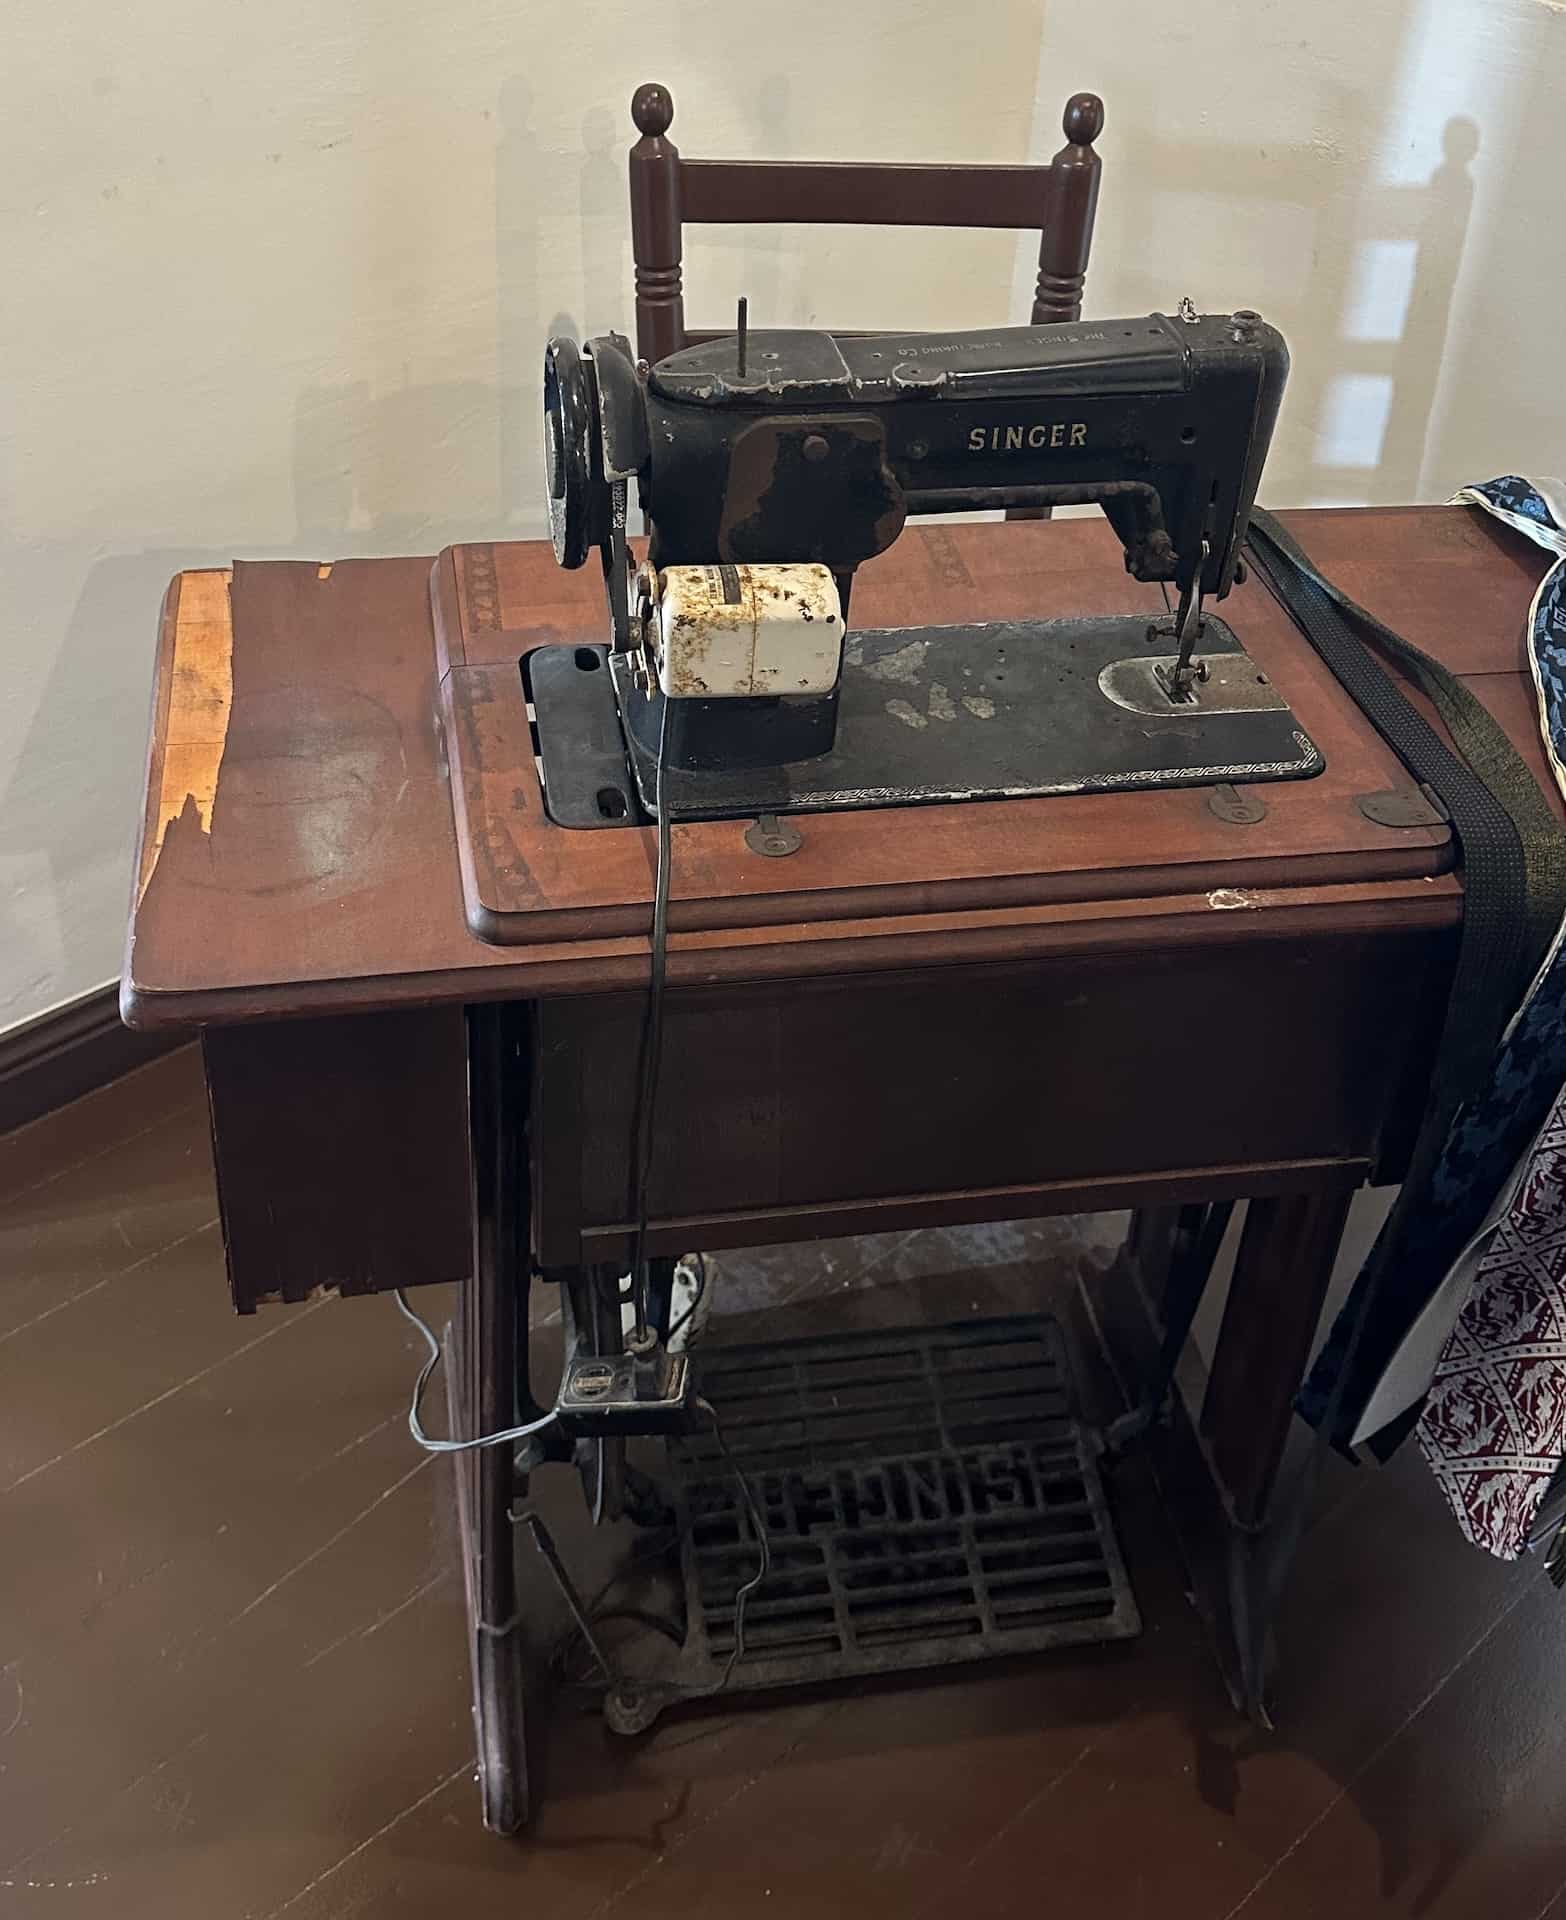 Singer sewing machine at the Community Museum